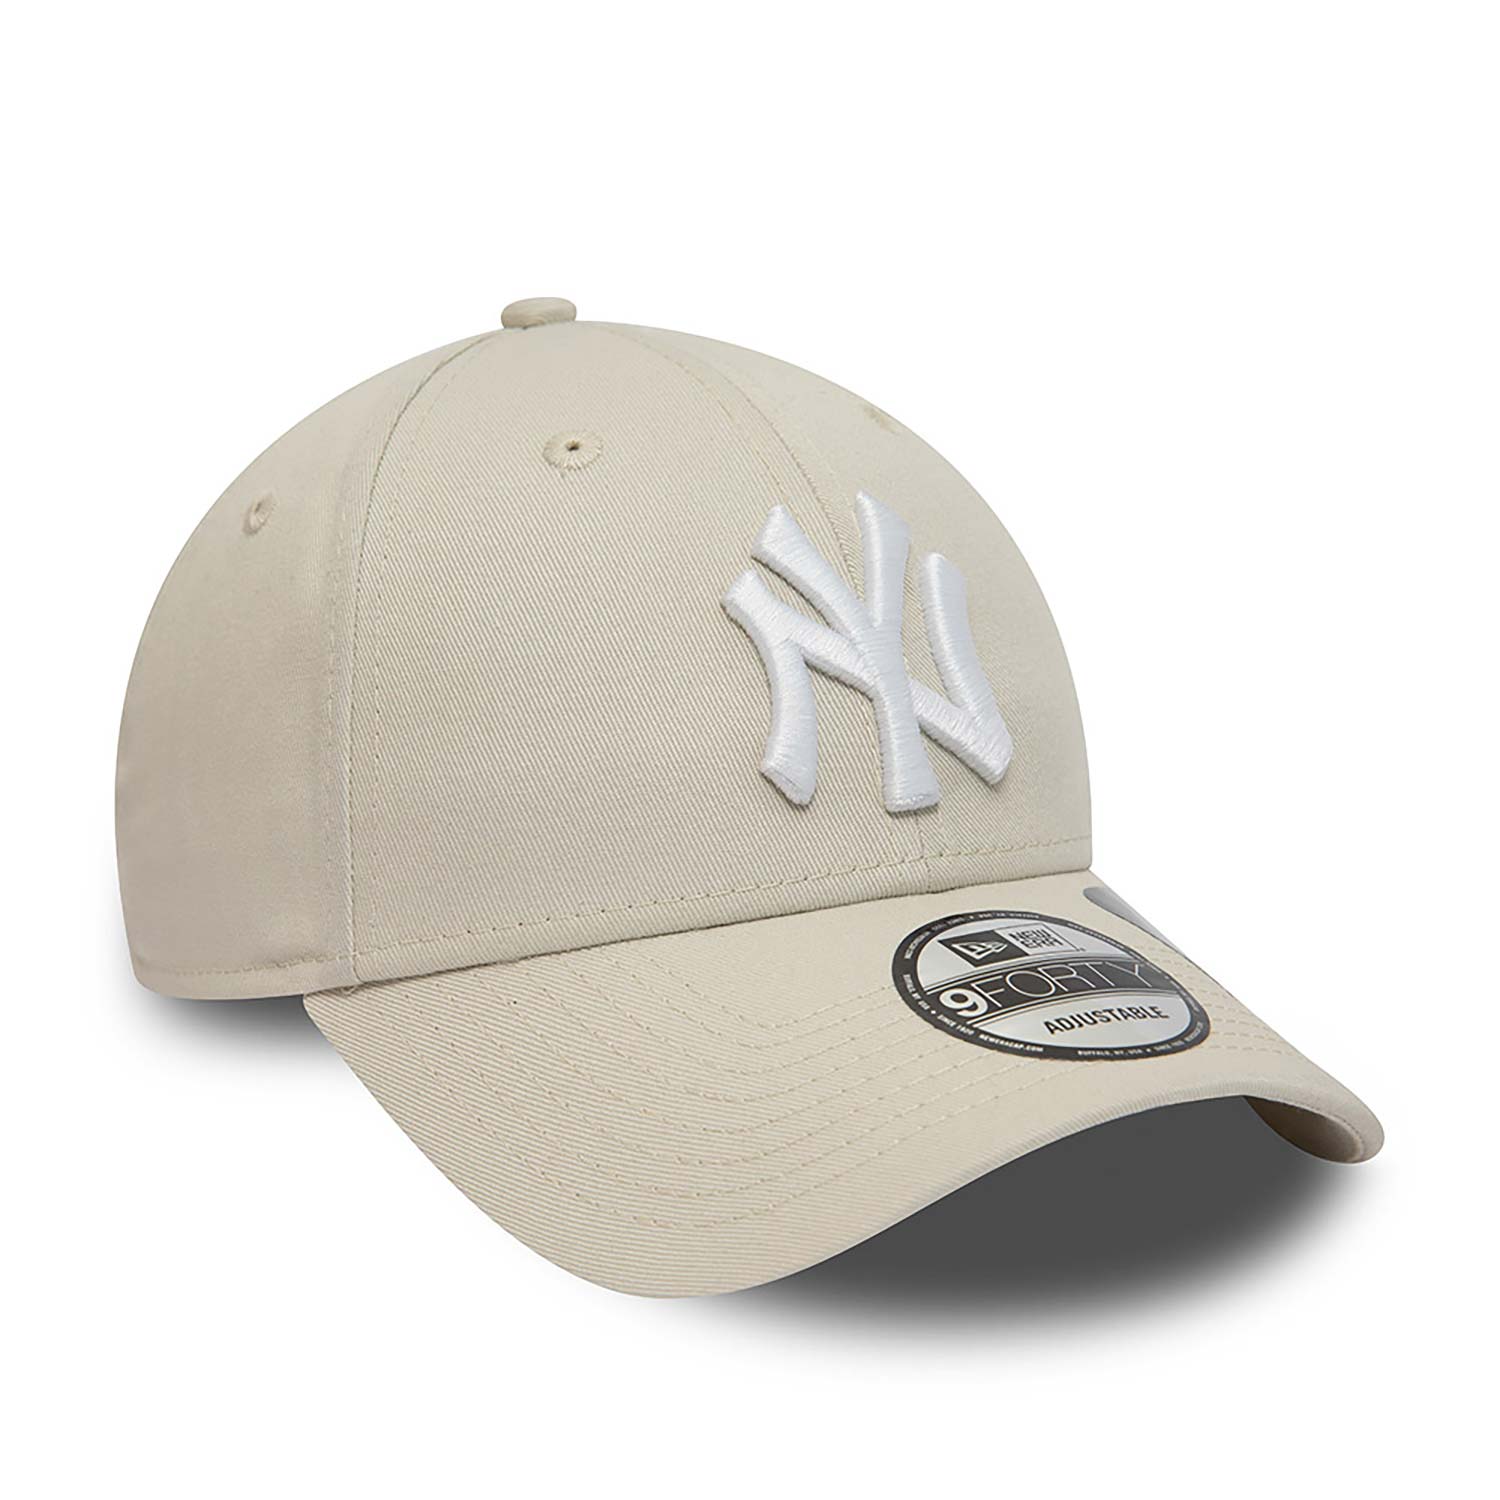 New York Yankees Repreve League Essential Stone 9FORTY Adjustable Cap